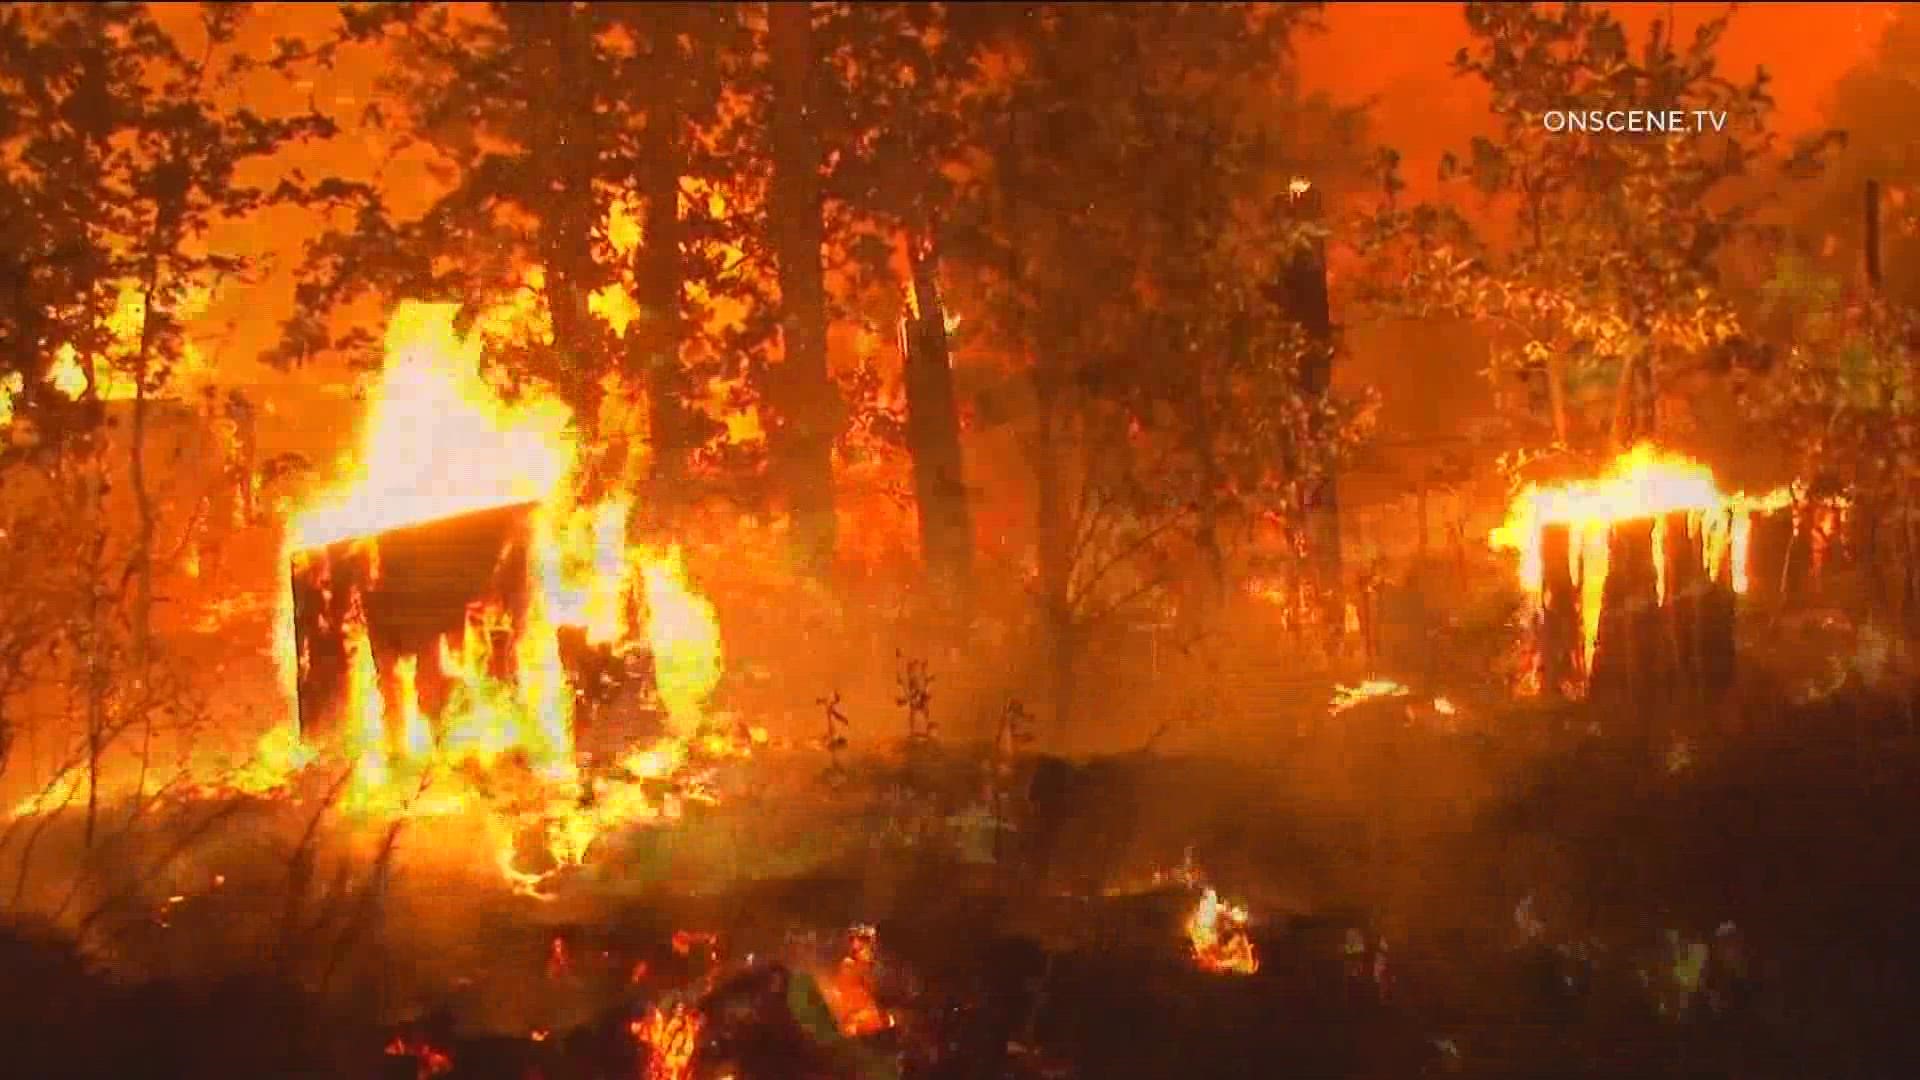 The Oak Fire has already burned at least 10 homes and forced thousands of people to evacuate.